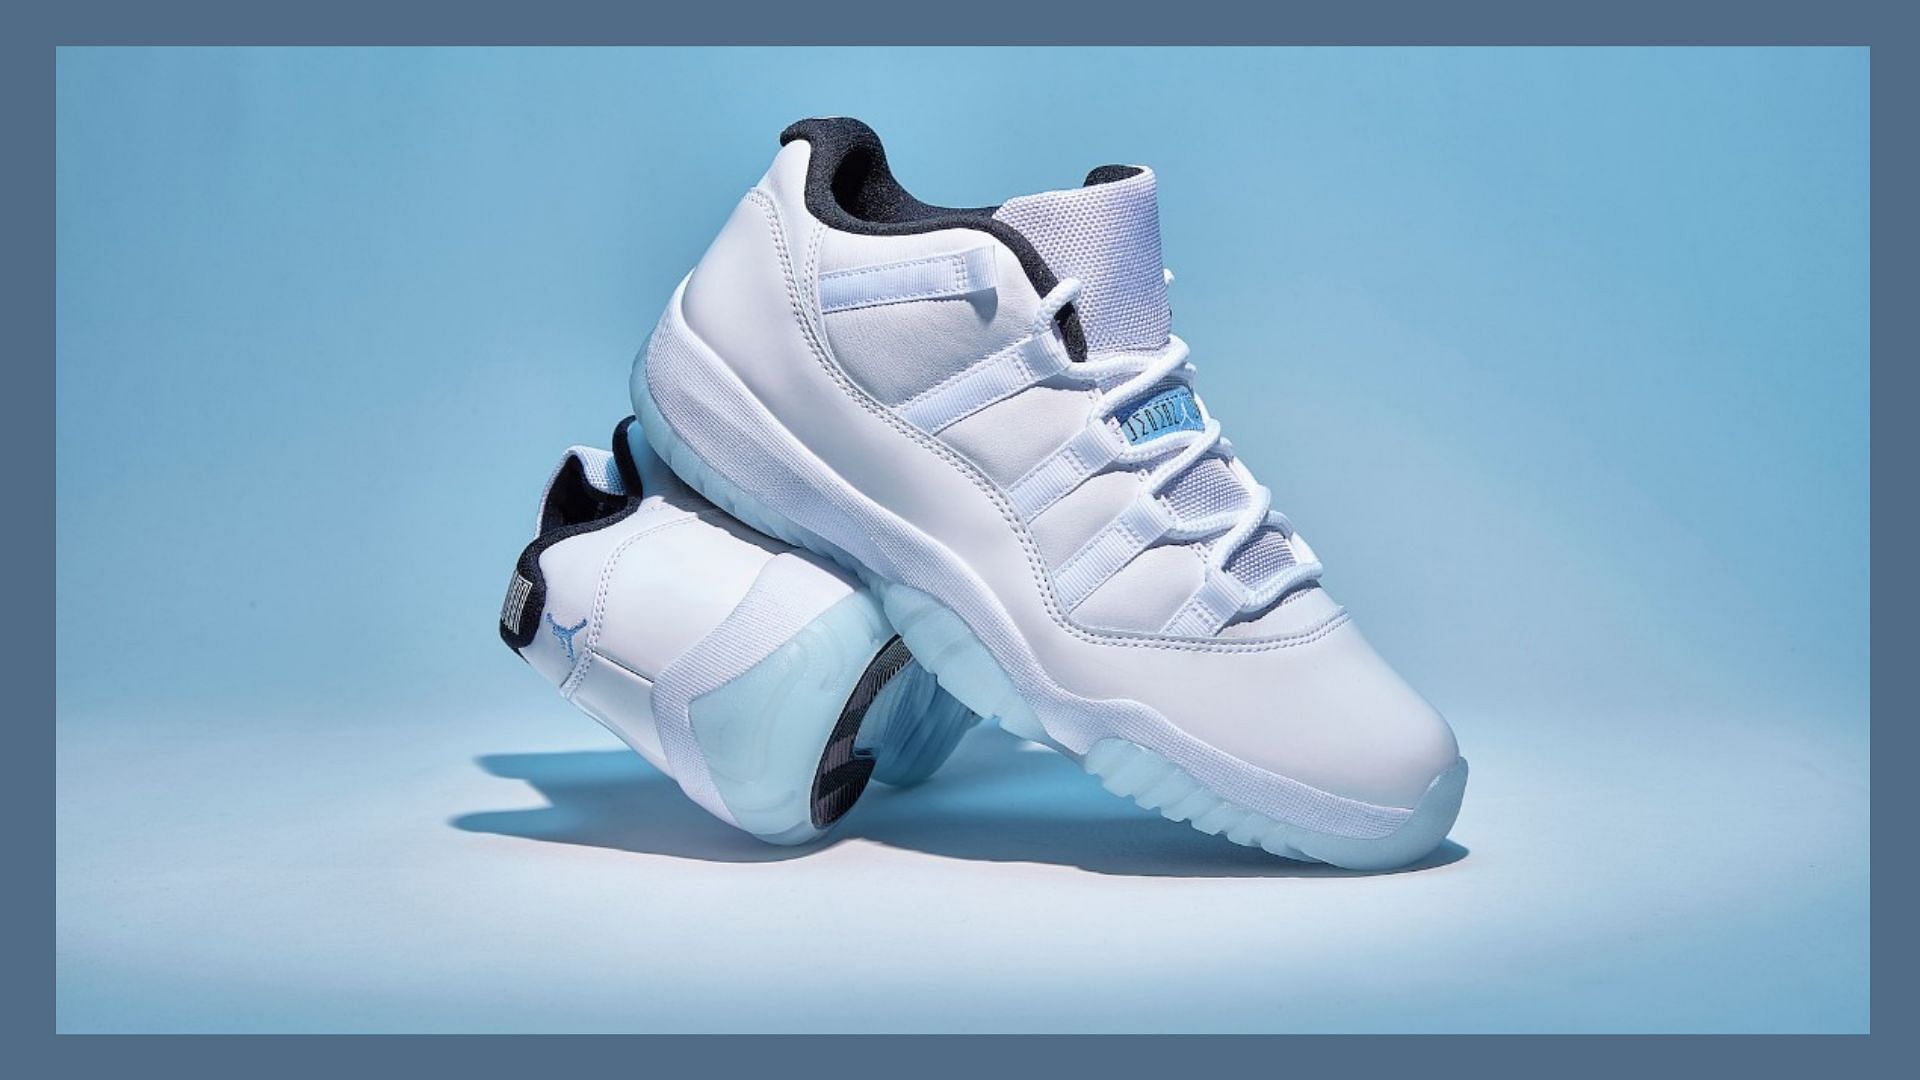 Take a closer look at the Legend Blue colorway (Image via Twitter/@FinishLine)